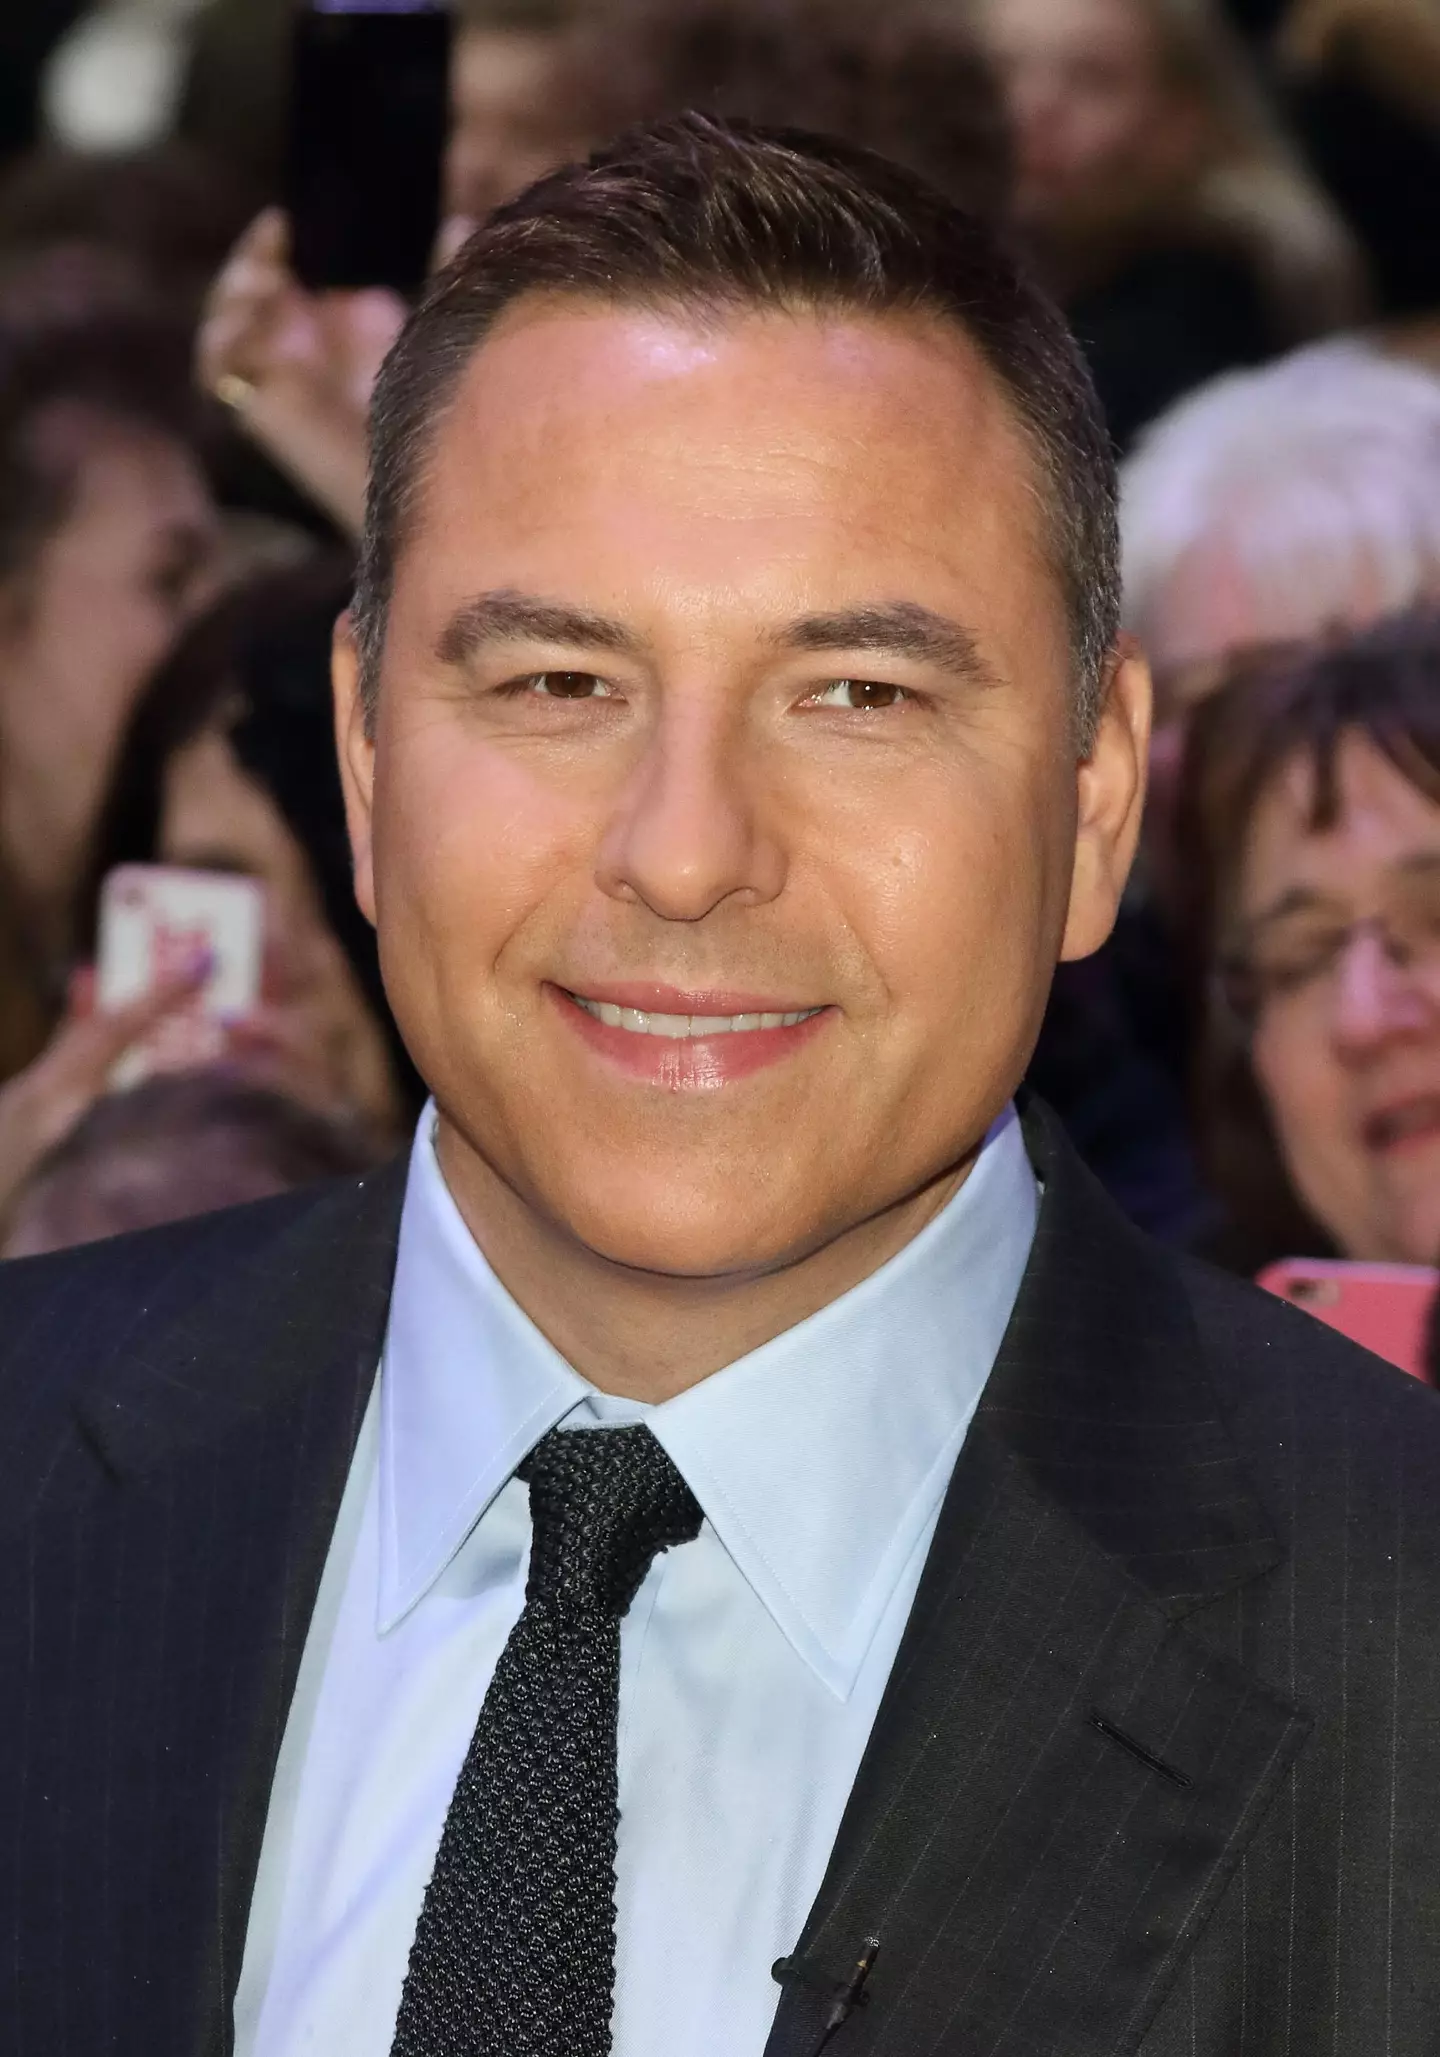 David Walliams has apologised after leaked recordings in which he made offensive comments were made public.